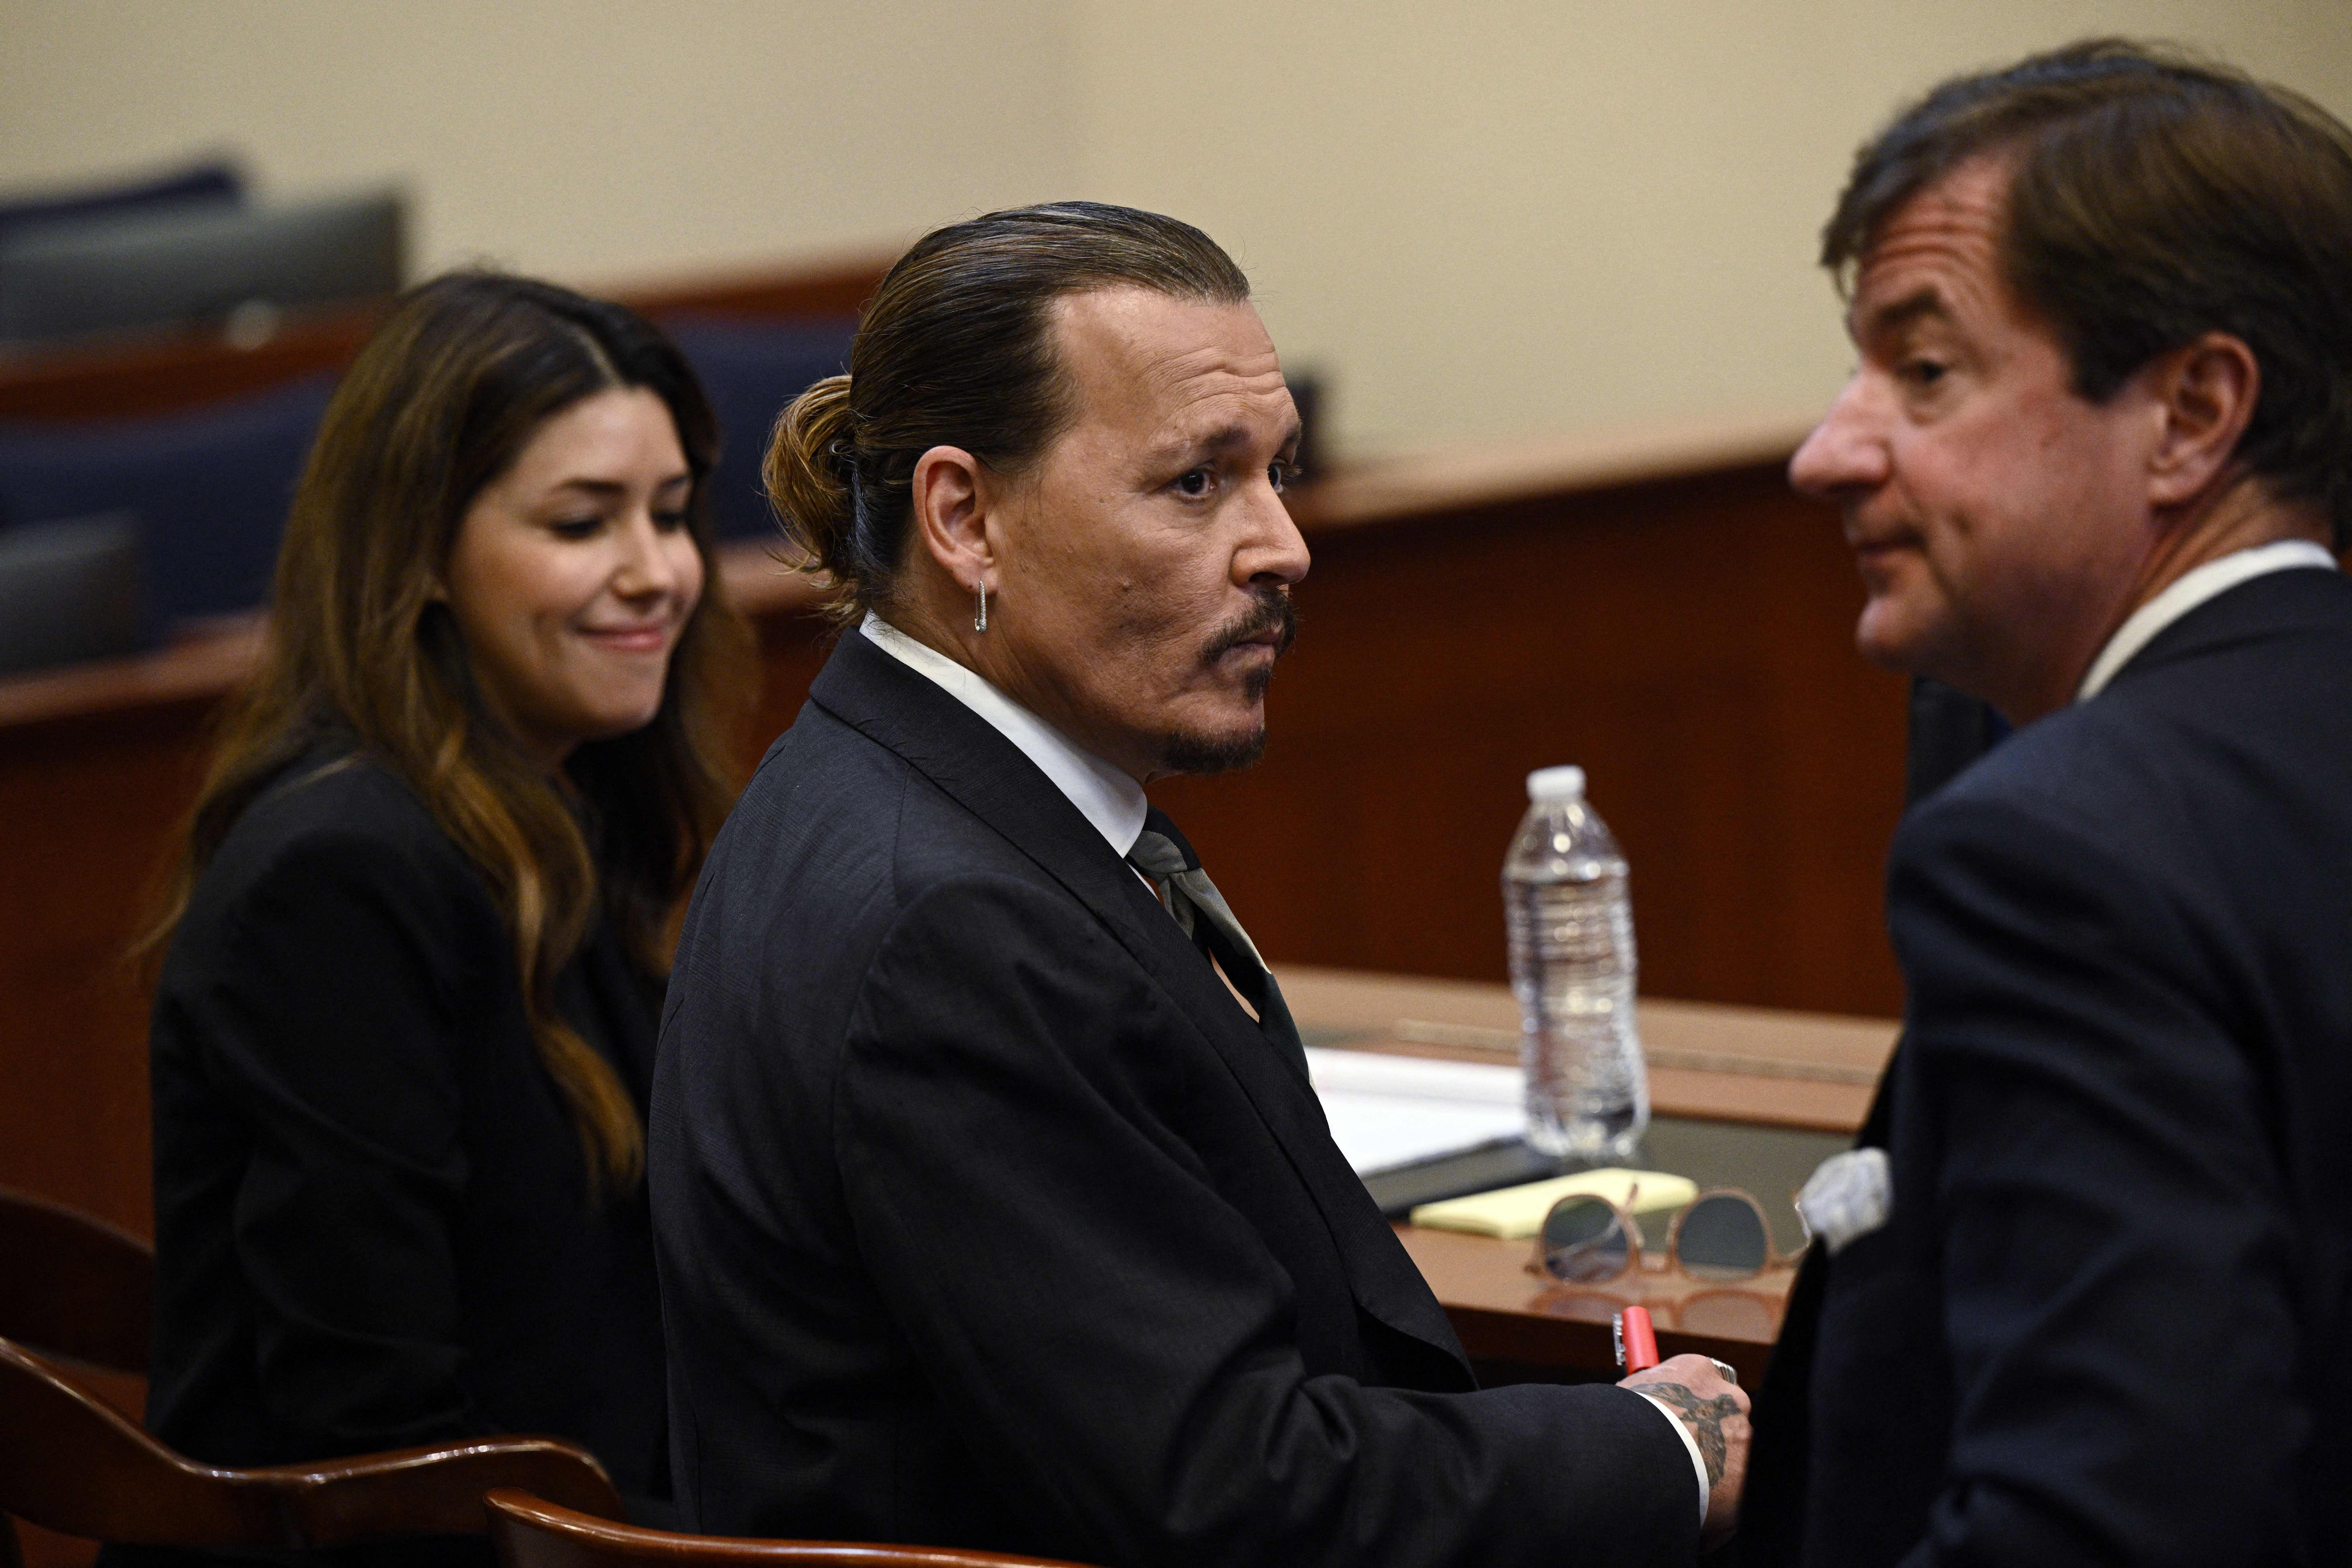 Johnny Depp sits in the courtroom at the Fairfax County Circuit Courthouse in Fairfax, Virginia, for his defamation trial, on April 26, 2022. | Source: Getty Images